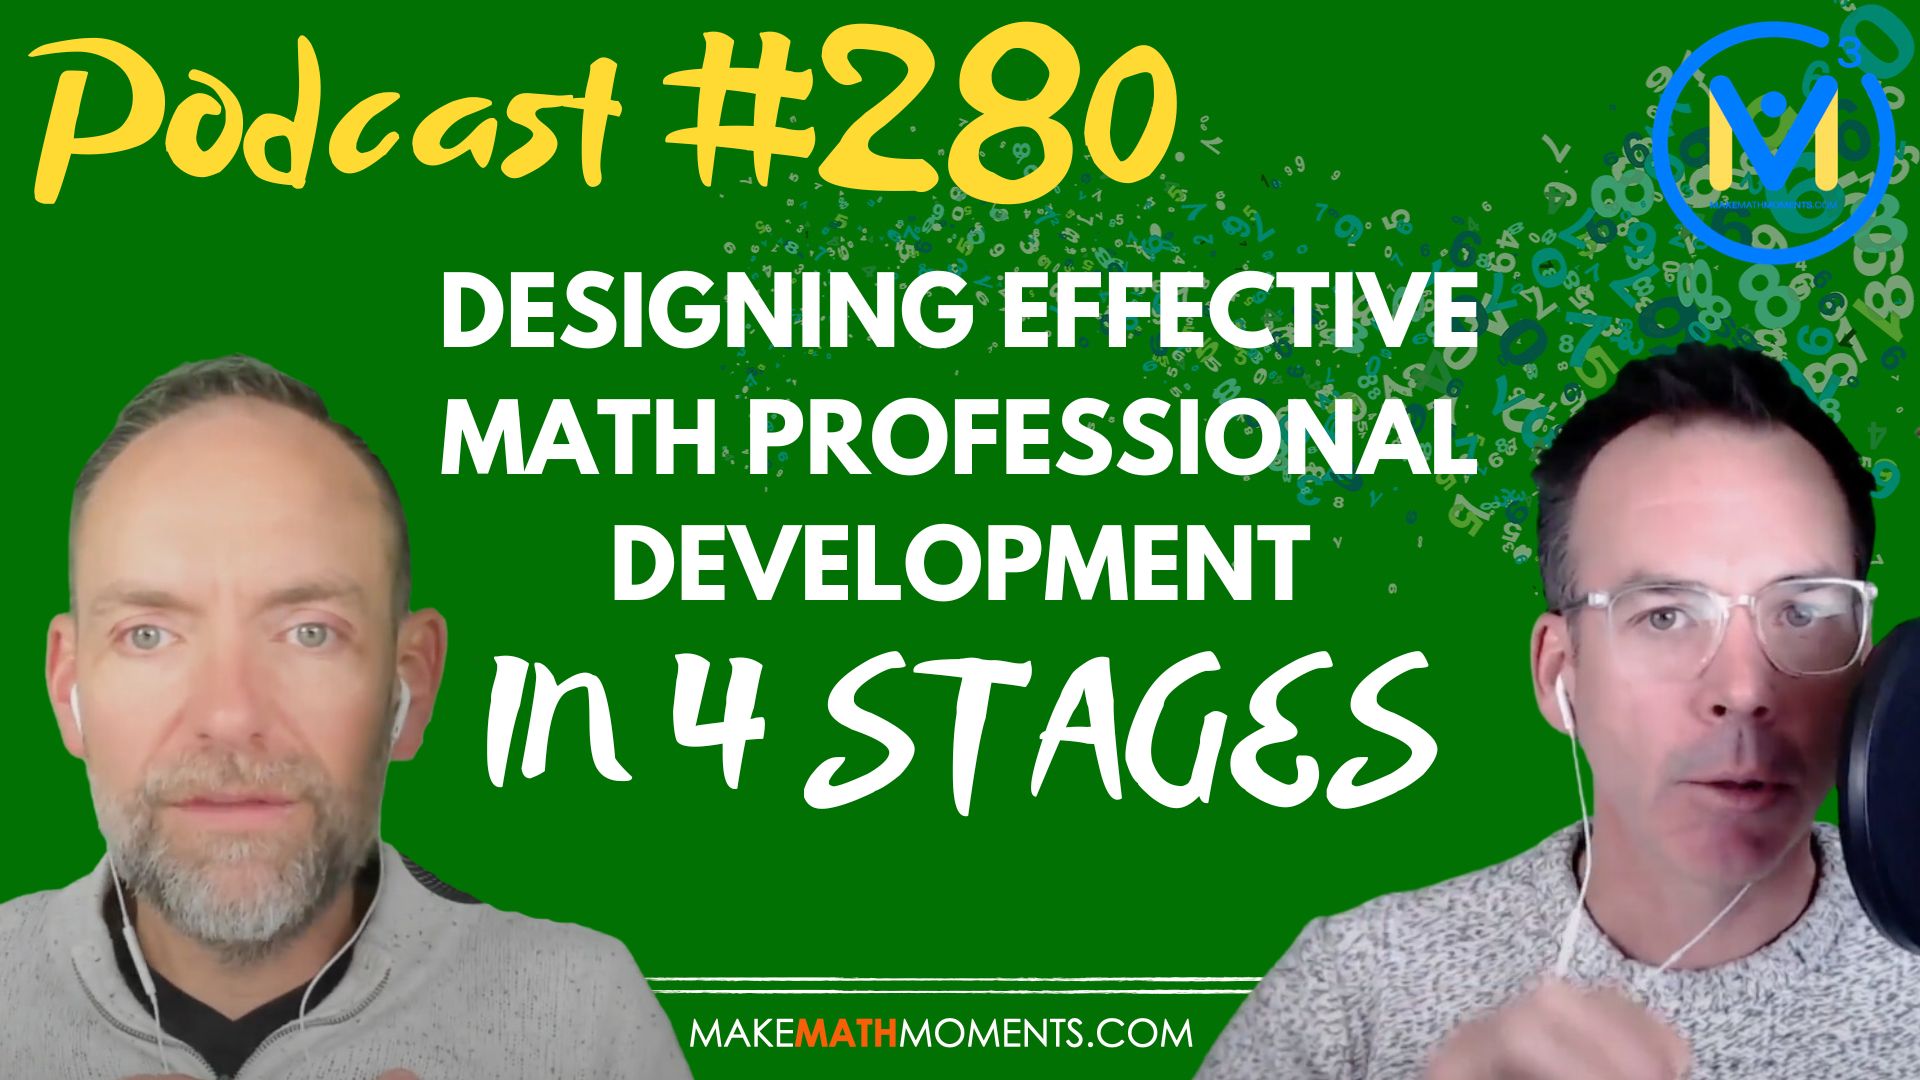 Episode #280: Designing Effective Math Professional Development in 4 Stages